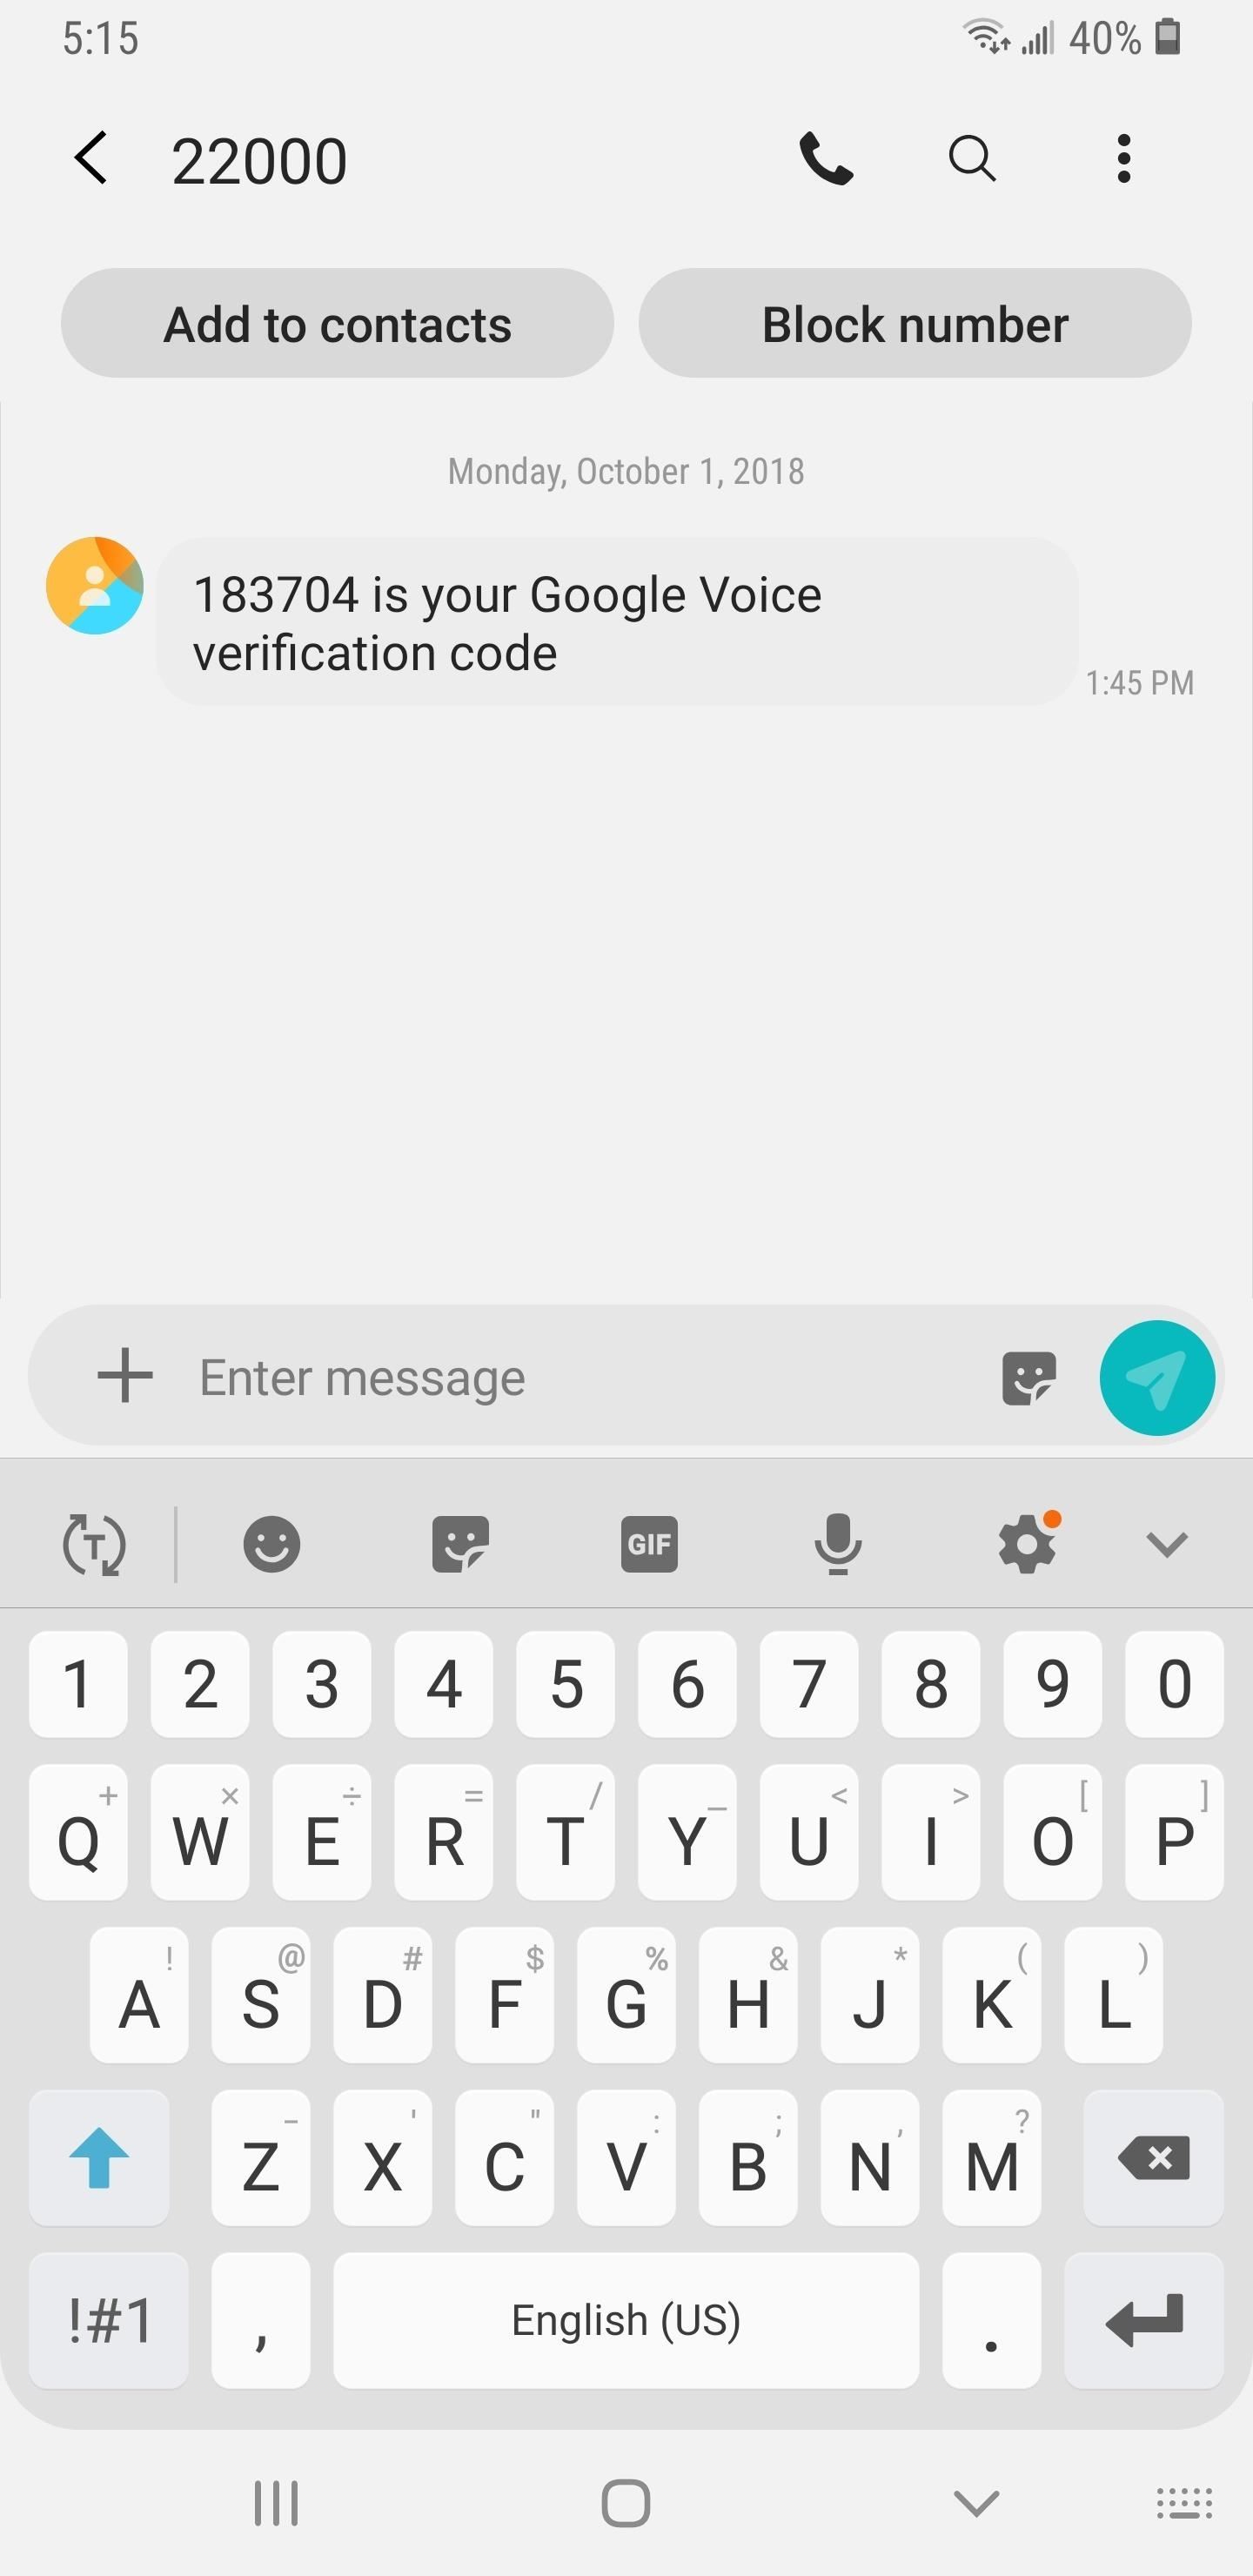 Here's What's New with Samsung's Messages App in One UI